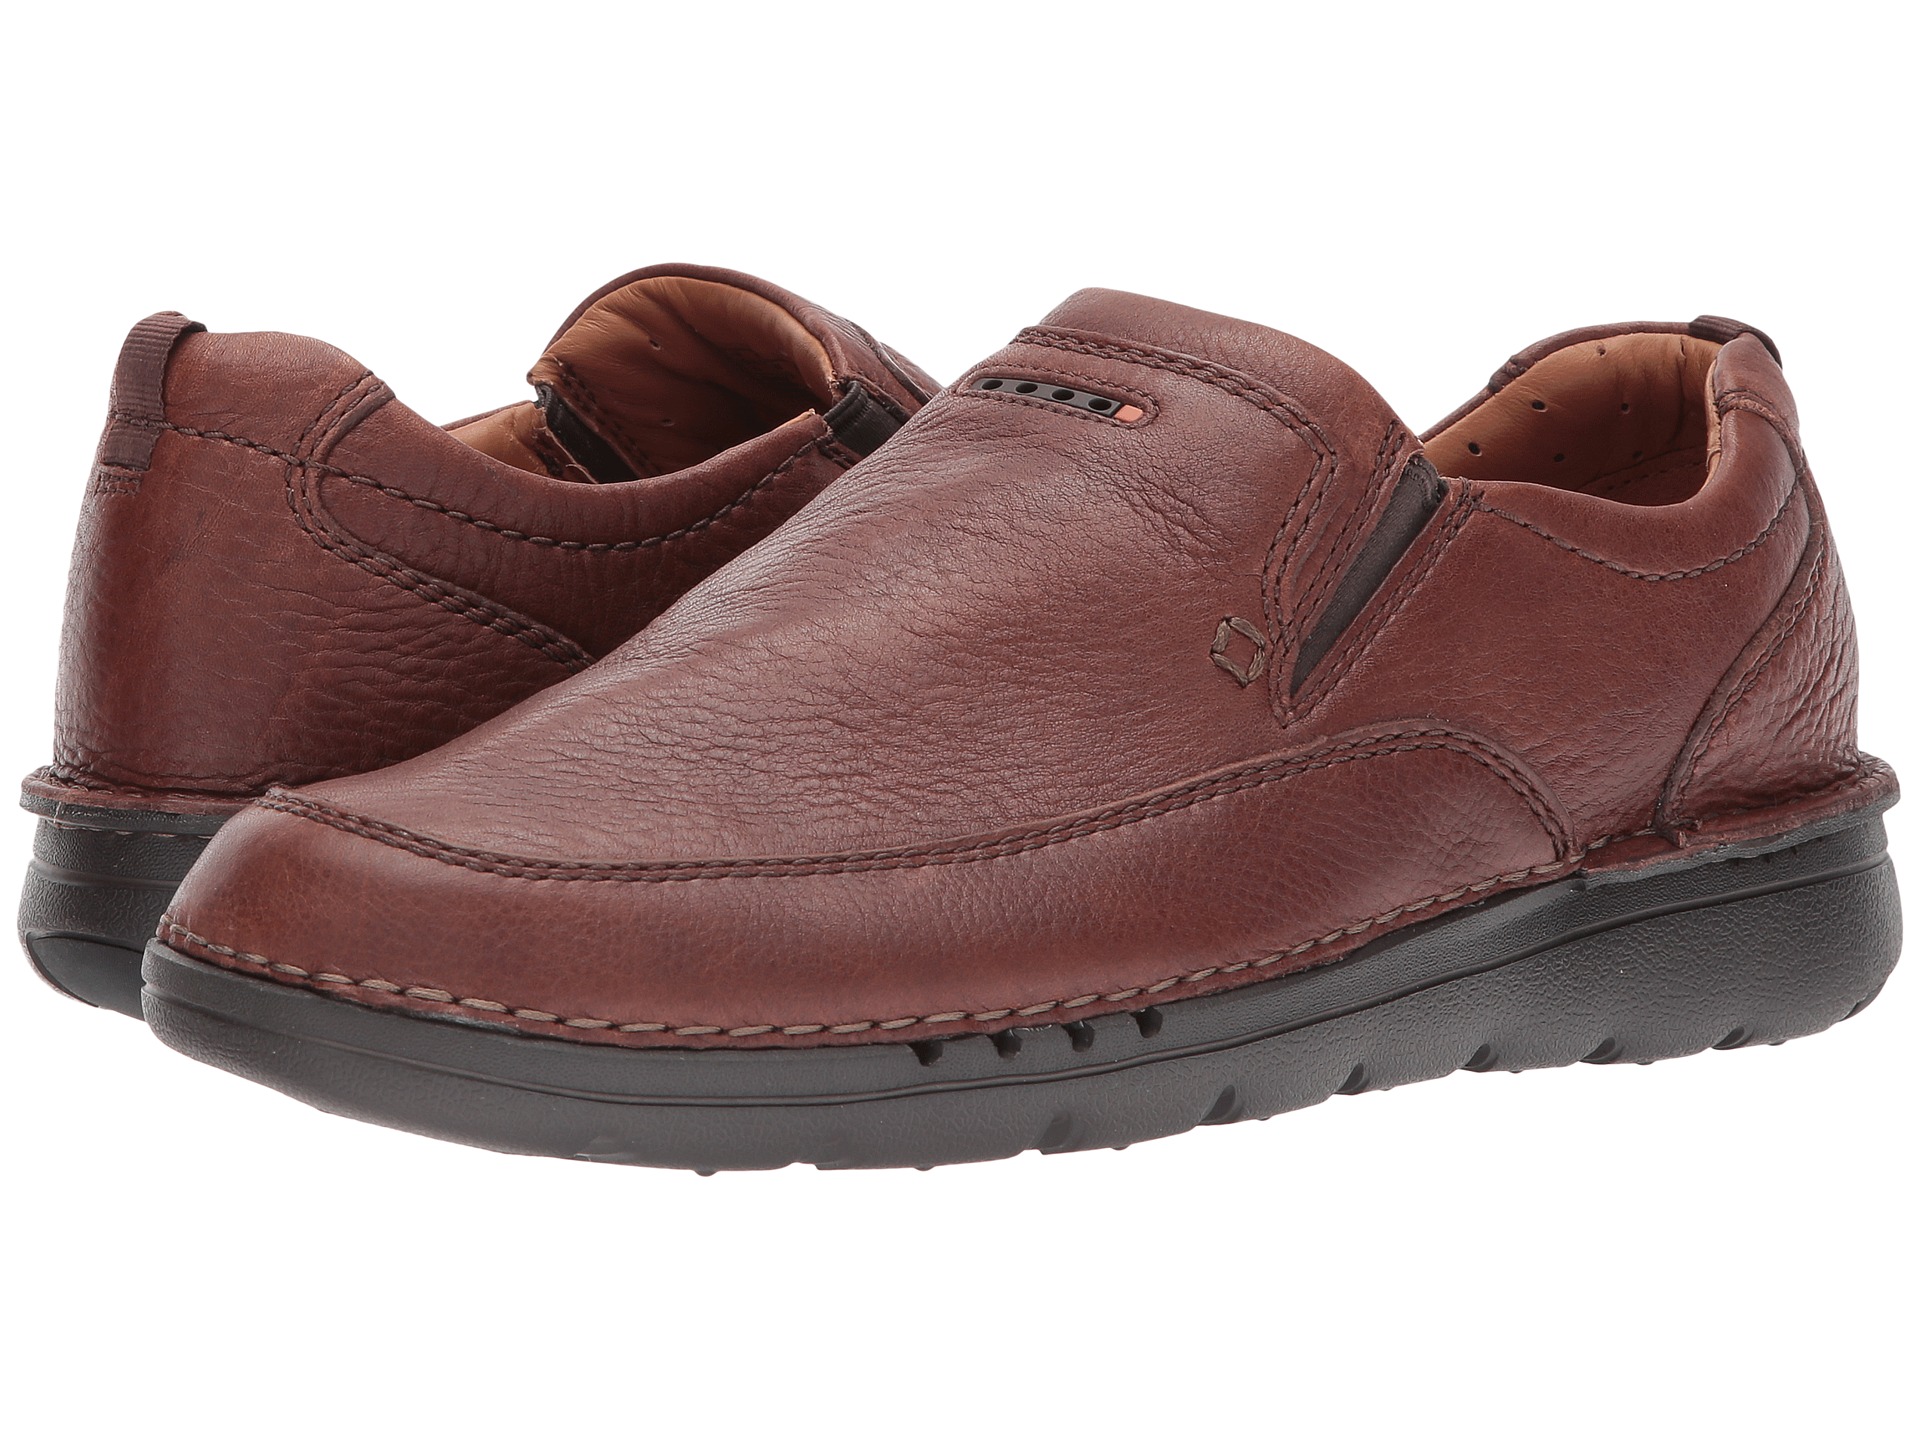 Clarks UnNature Easy at Zappos.com